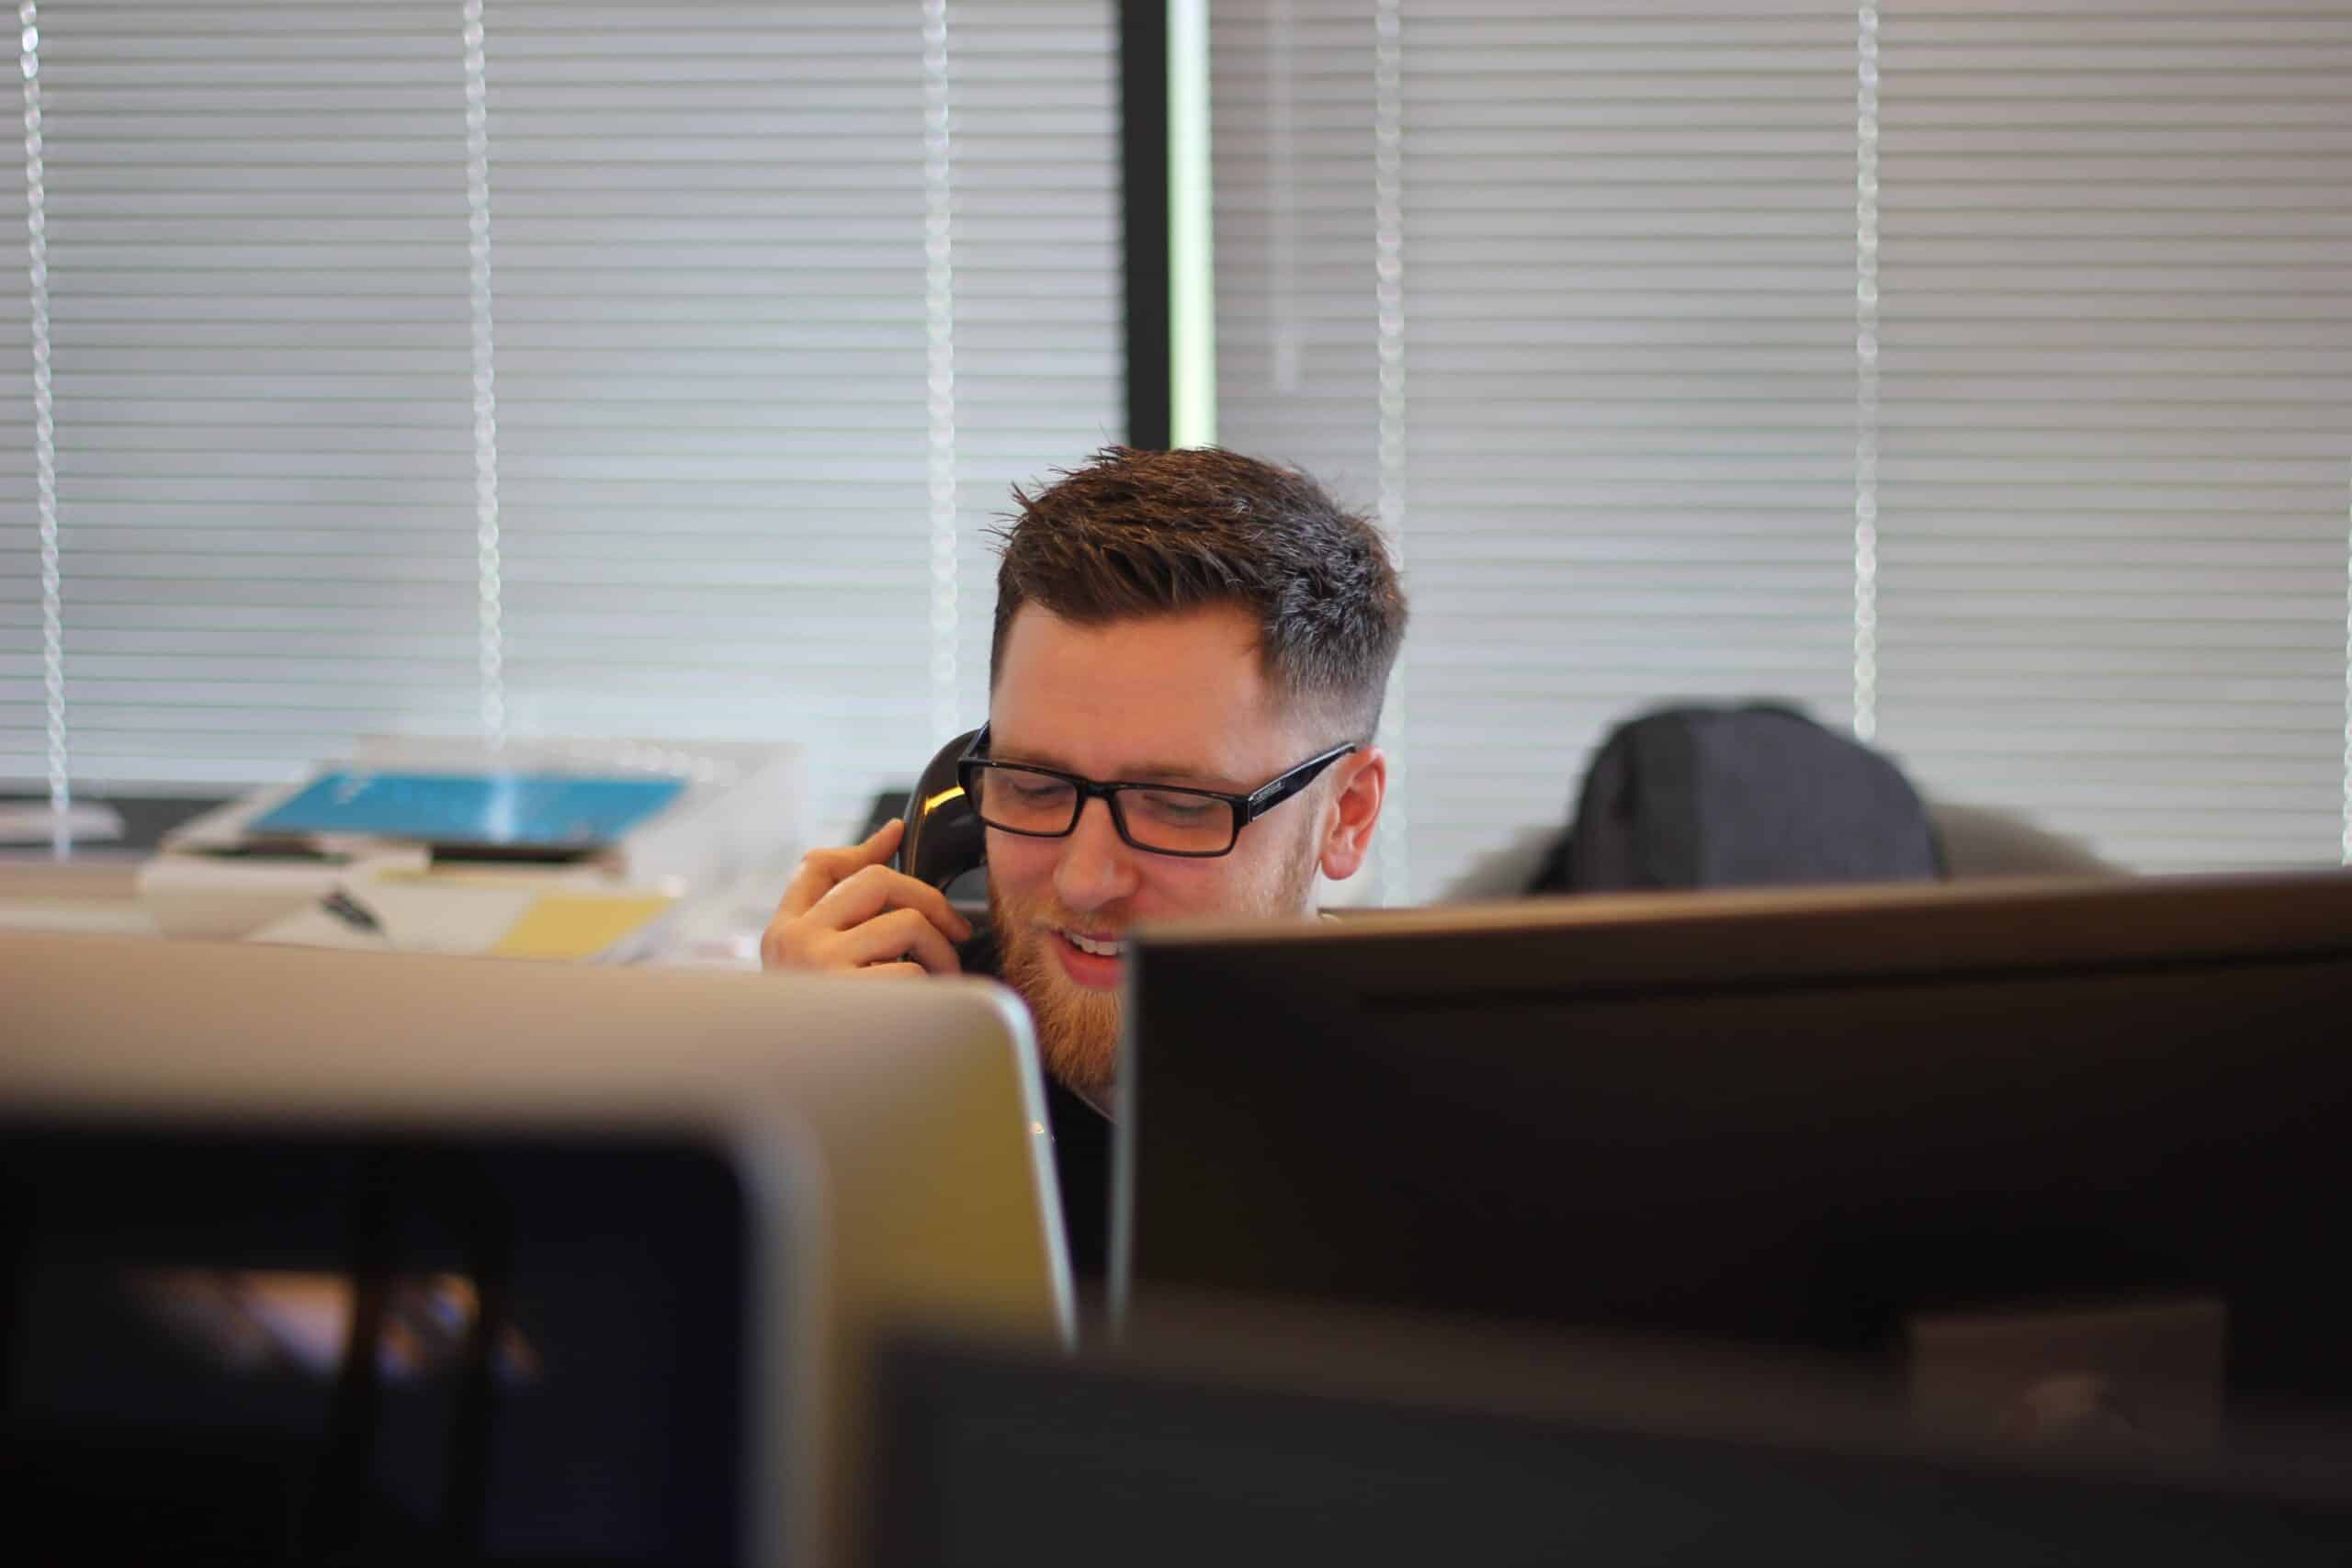 person on the phone in an office setting